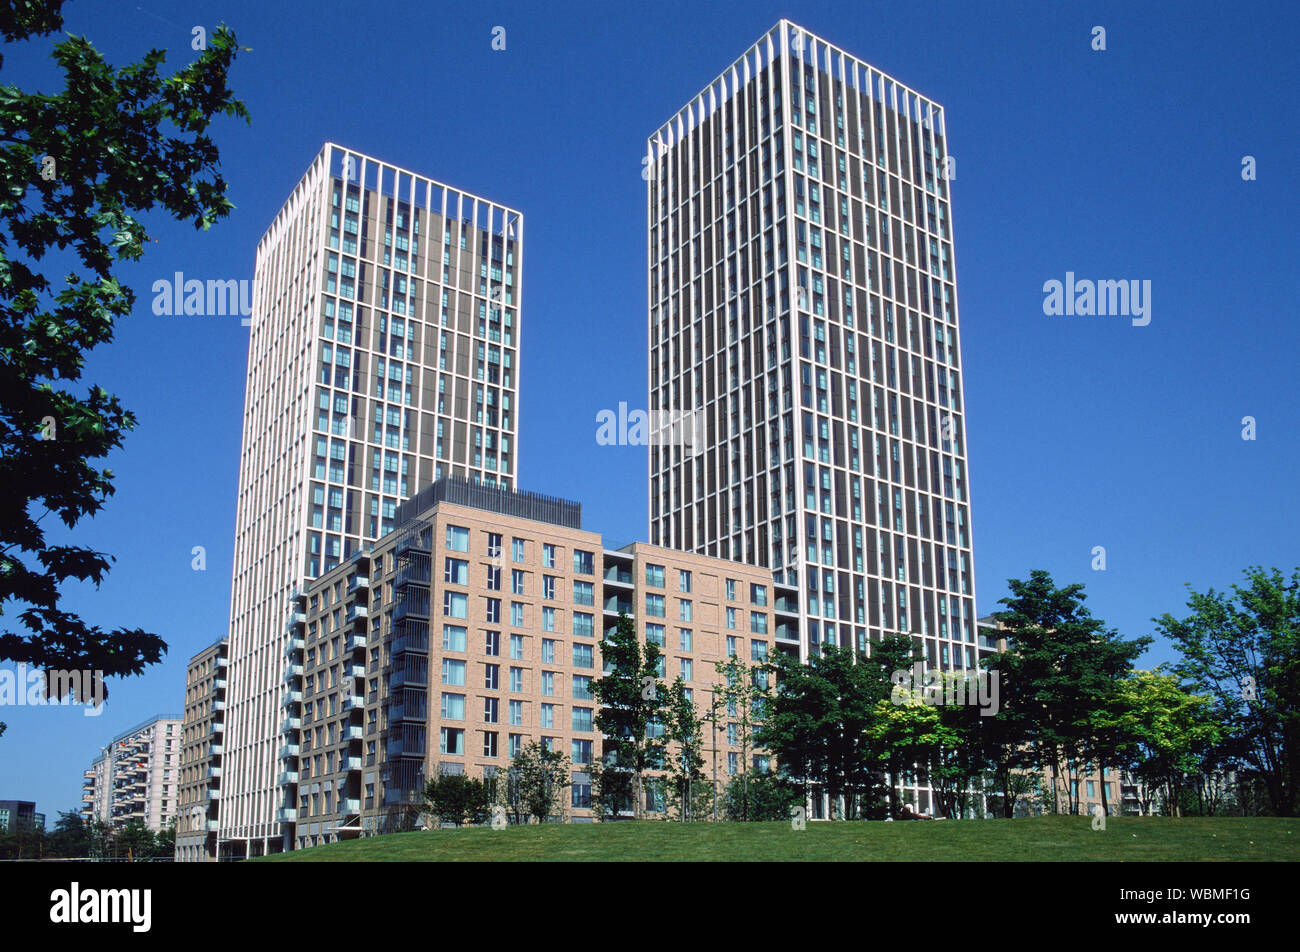 The new Victory Plaza residential development in East Village, Stratford, East London UK Stock Photo